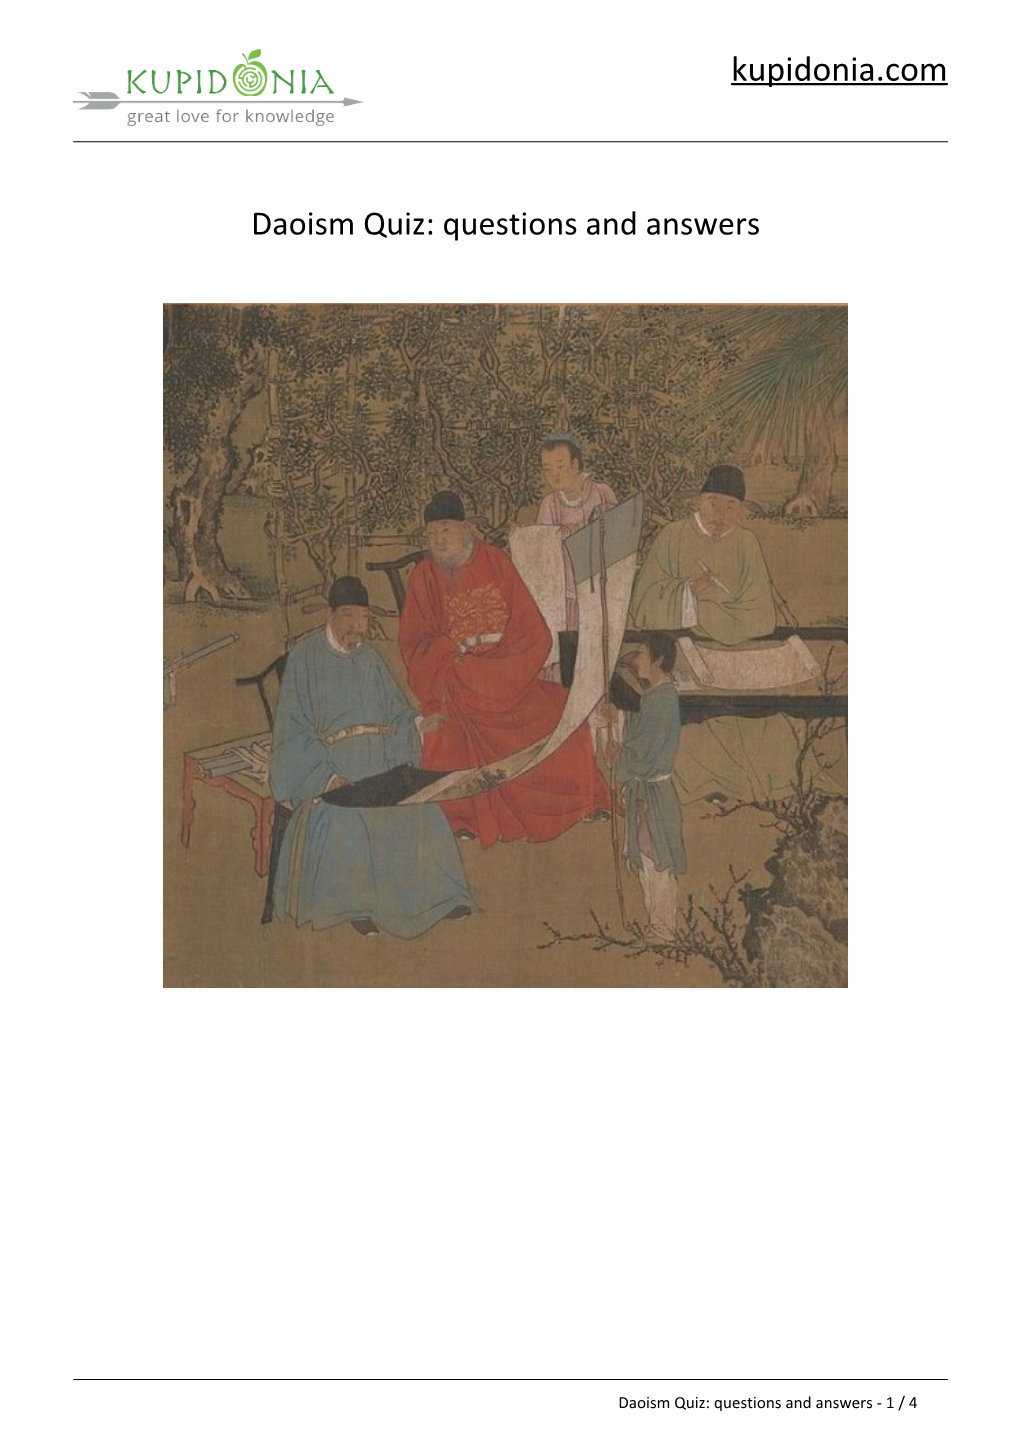 Daoism Quiz: Questions and Answers